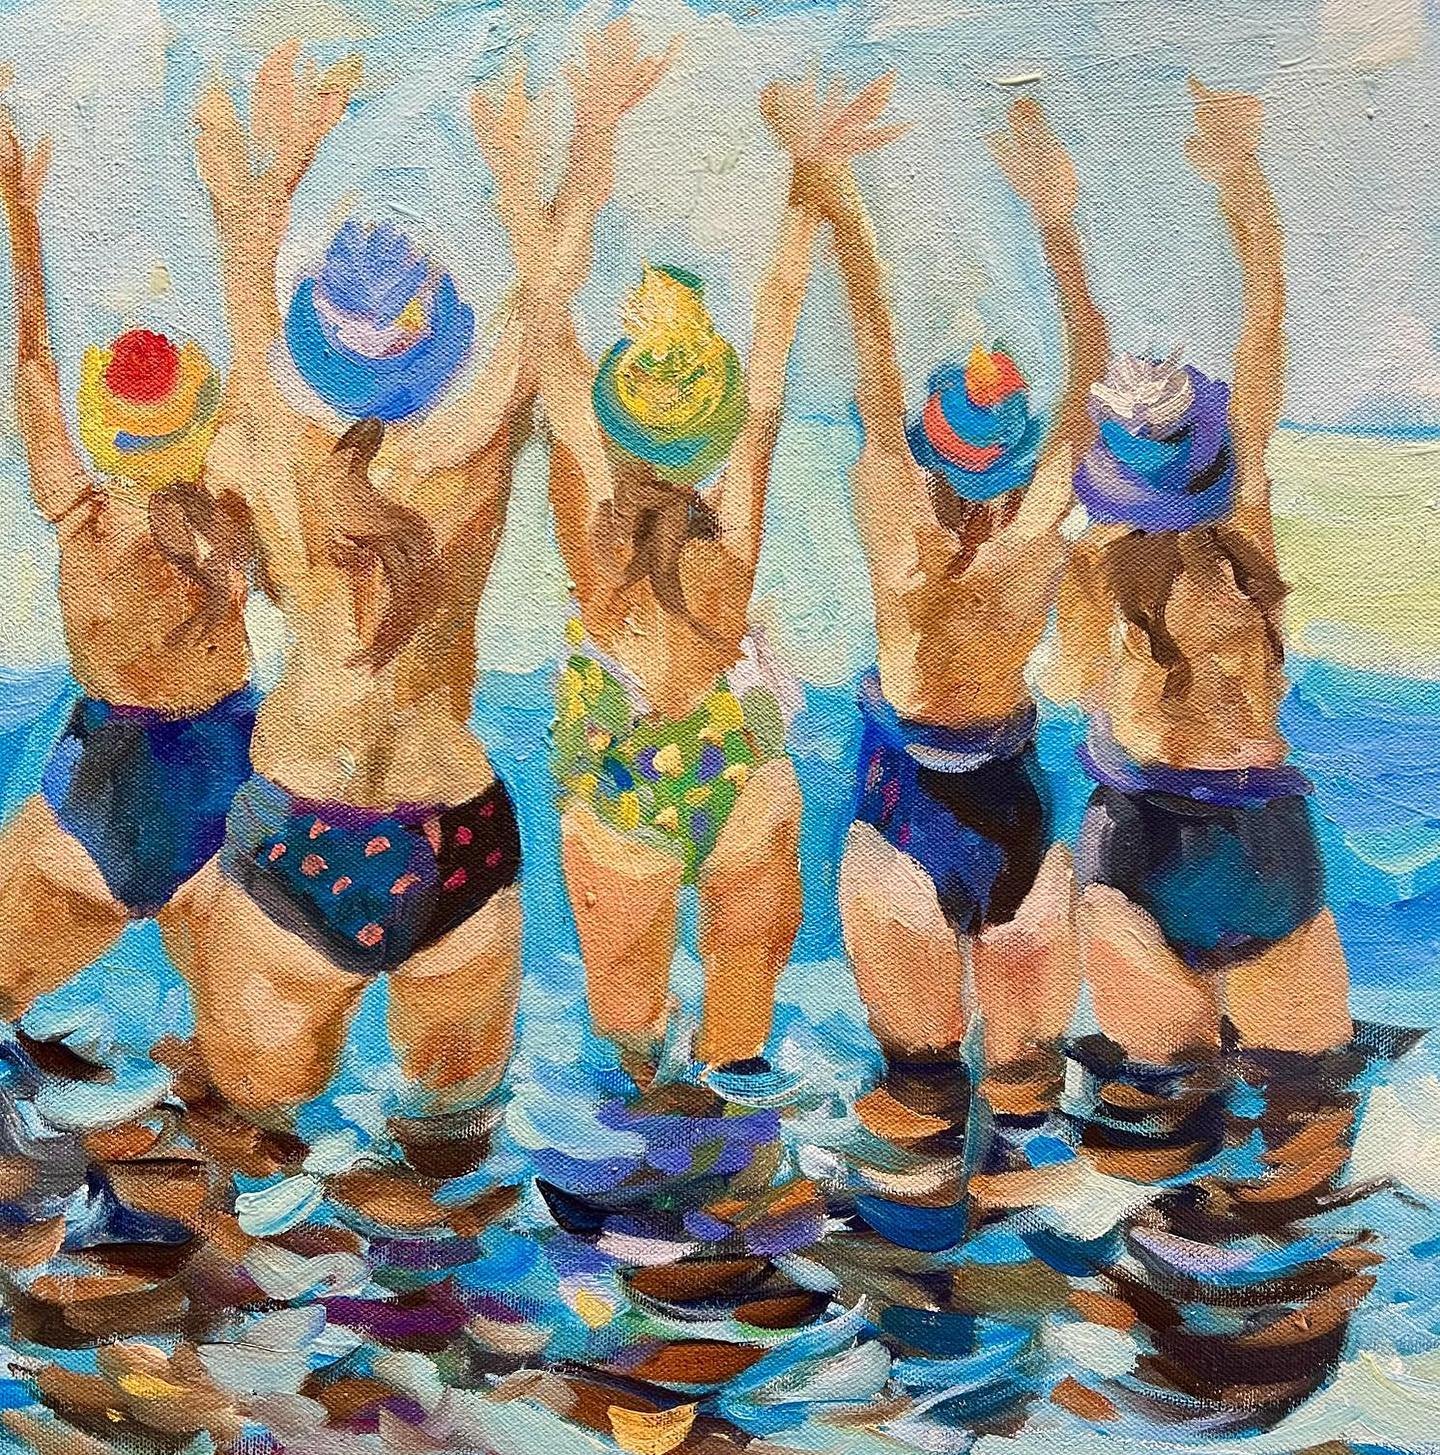 It&rsquo;s warming up - who&rsquo;s ready for a dip in the sea?
Oil painting by Sue McDonagh featured in our current exhibition #welshartist